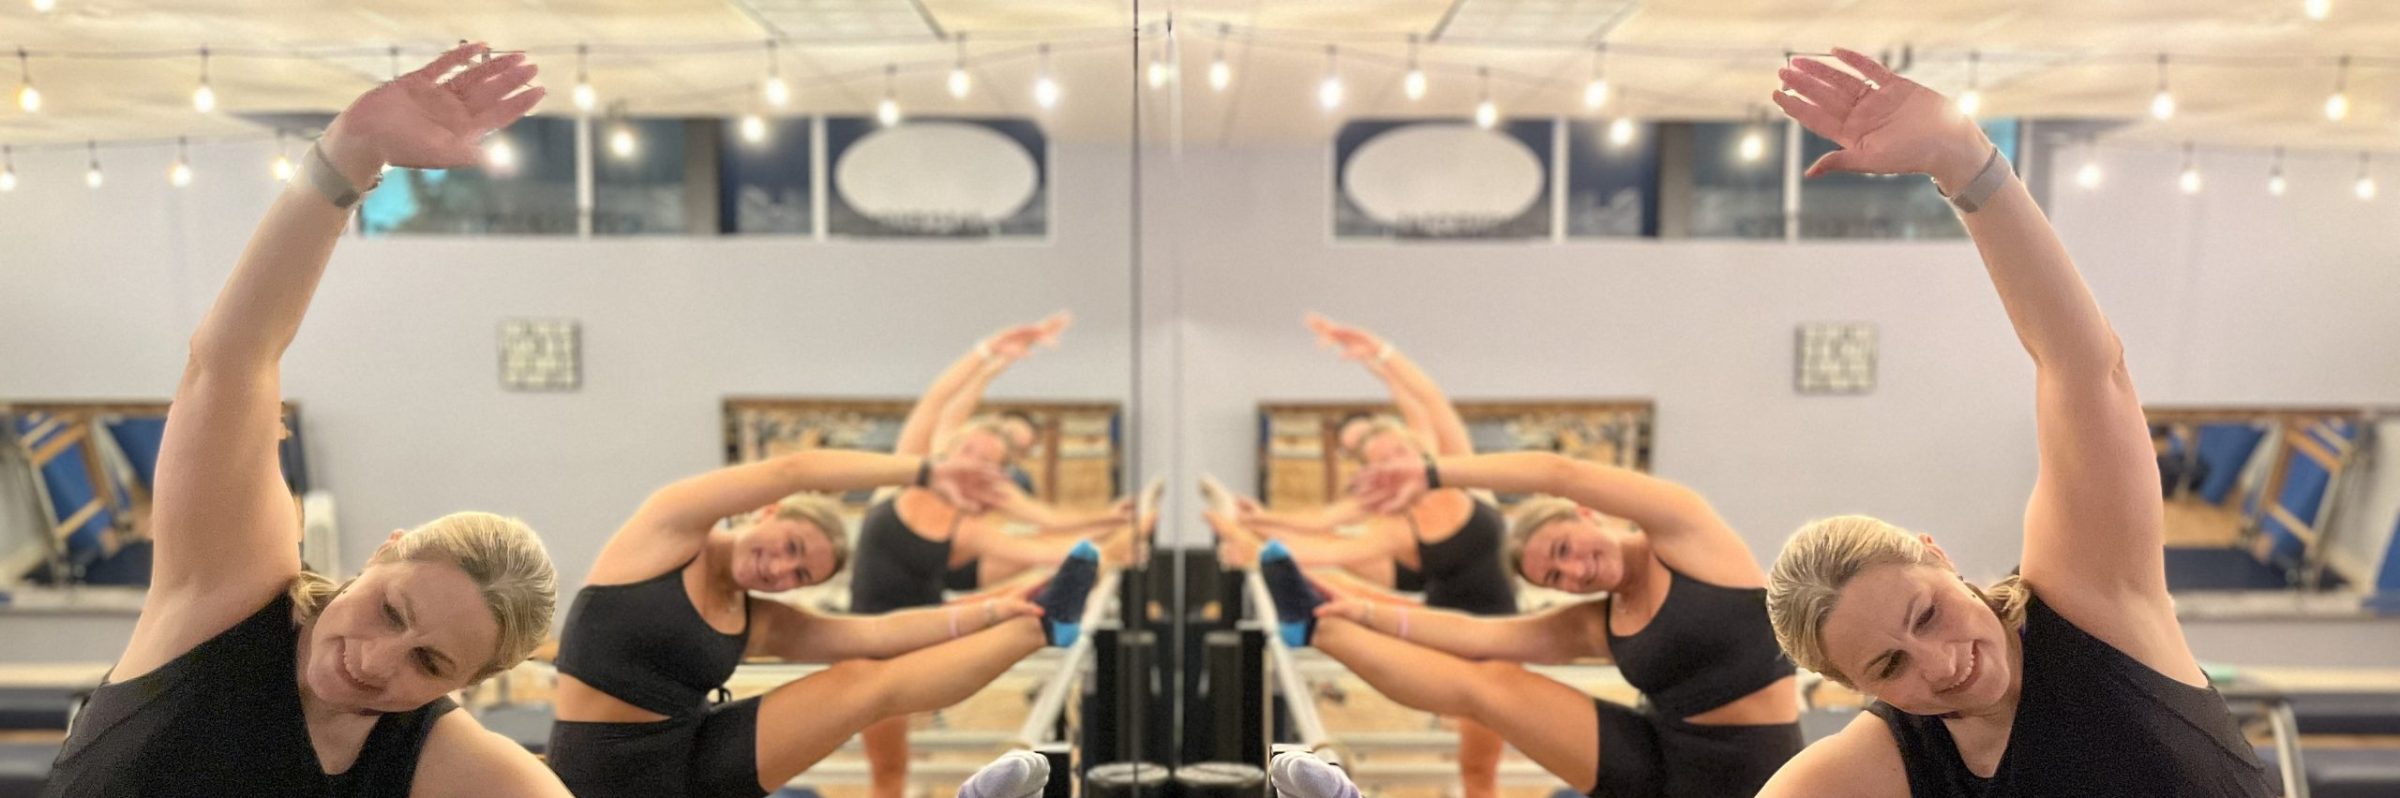 The Pilates ABsession - Long Island's full service independent Pilates studio, servicing Nassau County and Rockville Centre.